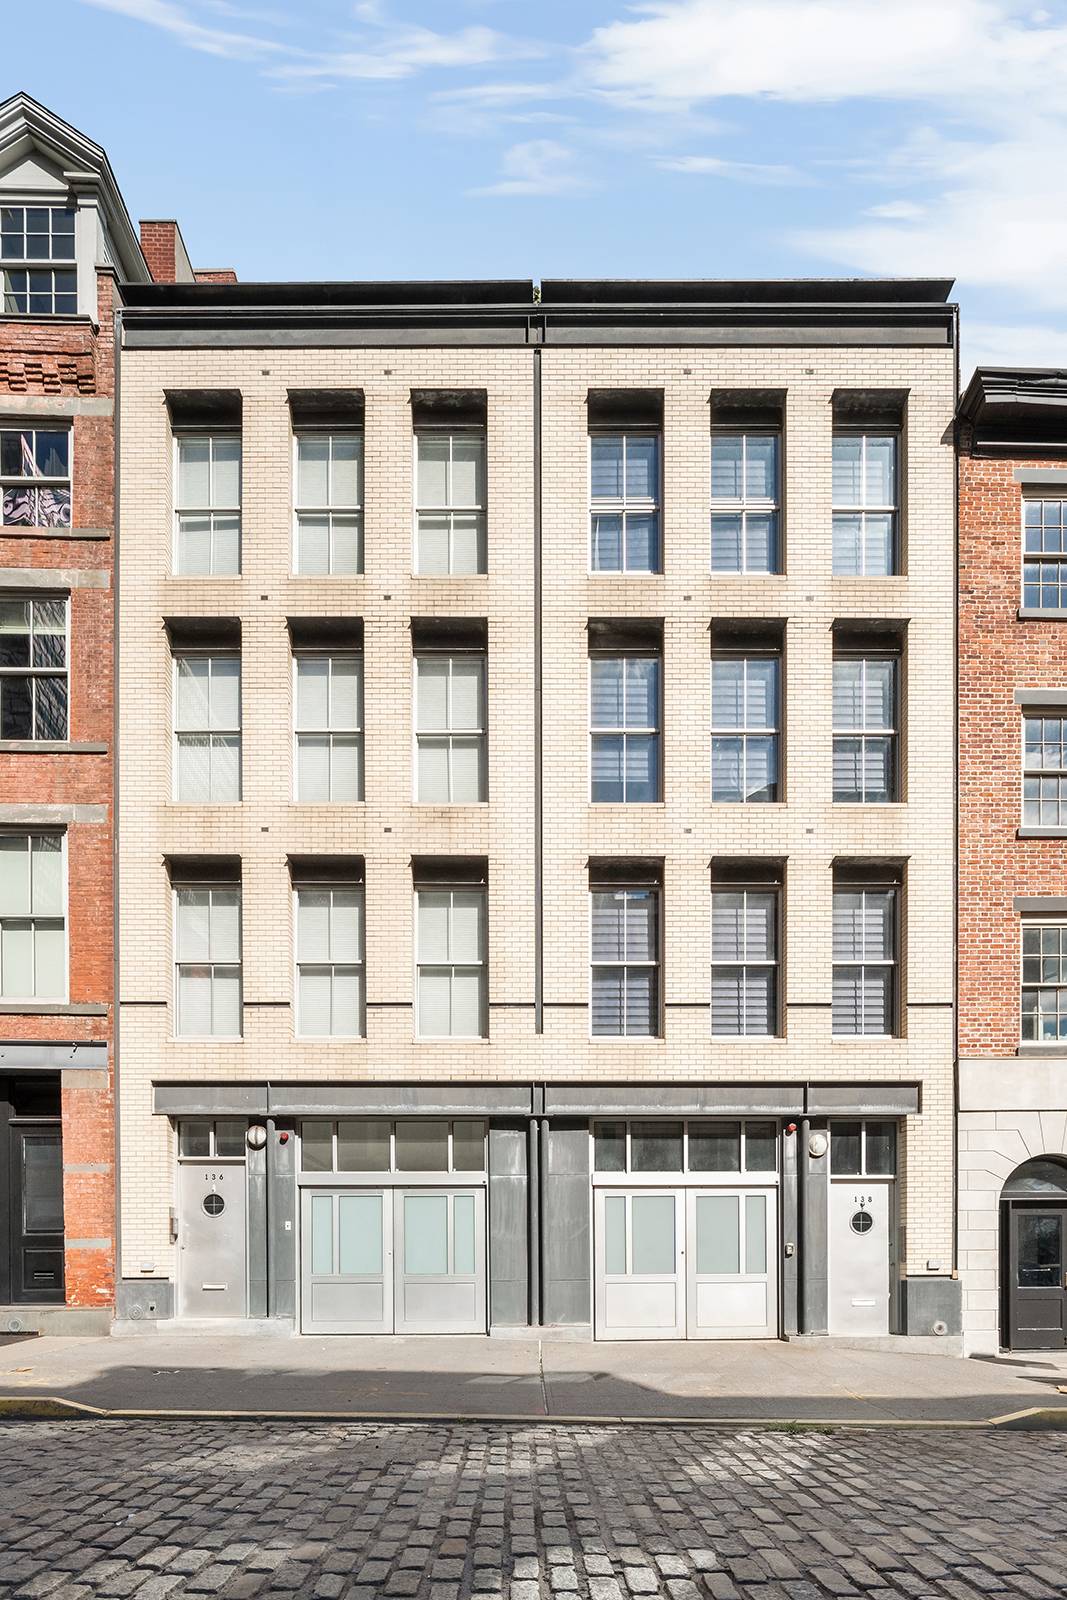 Located in the Historic South Street Seaport District, this four story townhouse has been fully renovated and features a landscaped rooftop terrace, a private garage, and comes with approved landmark ...